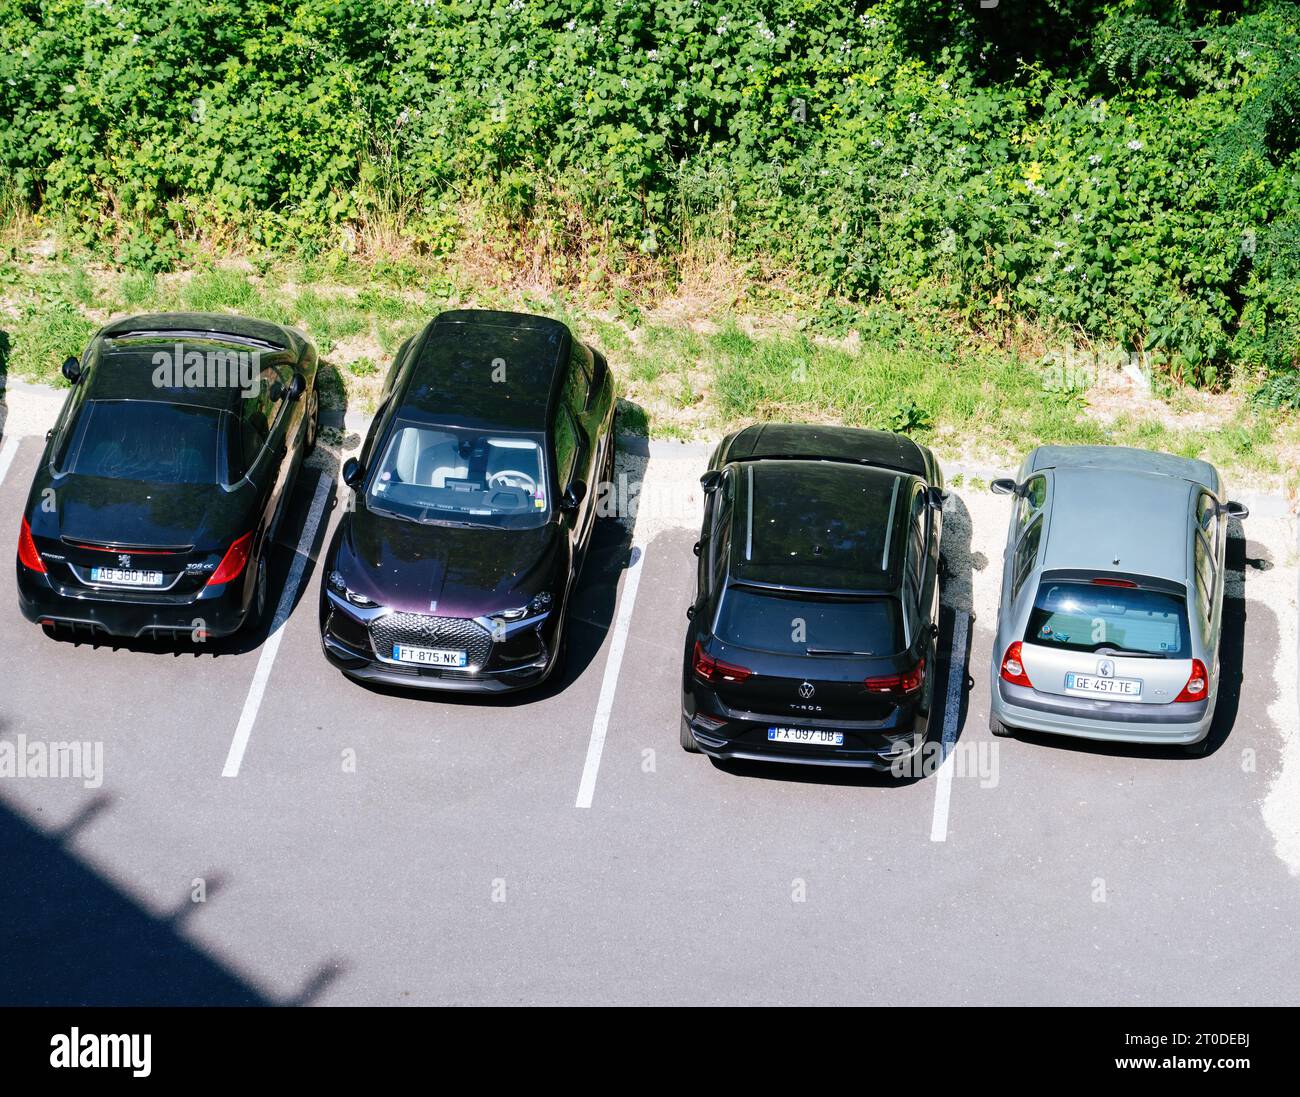 Strasbourg, France - Jun 5, 2023: A variety of cars - Renault, VW, SUV, estate wagons, Citroen, and DS models - stand parked in a row, set against a backdrop of towering bushes Stock Photo